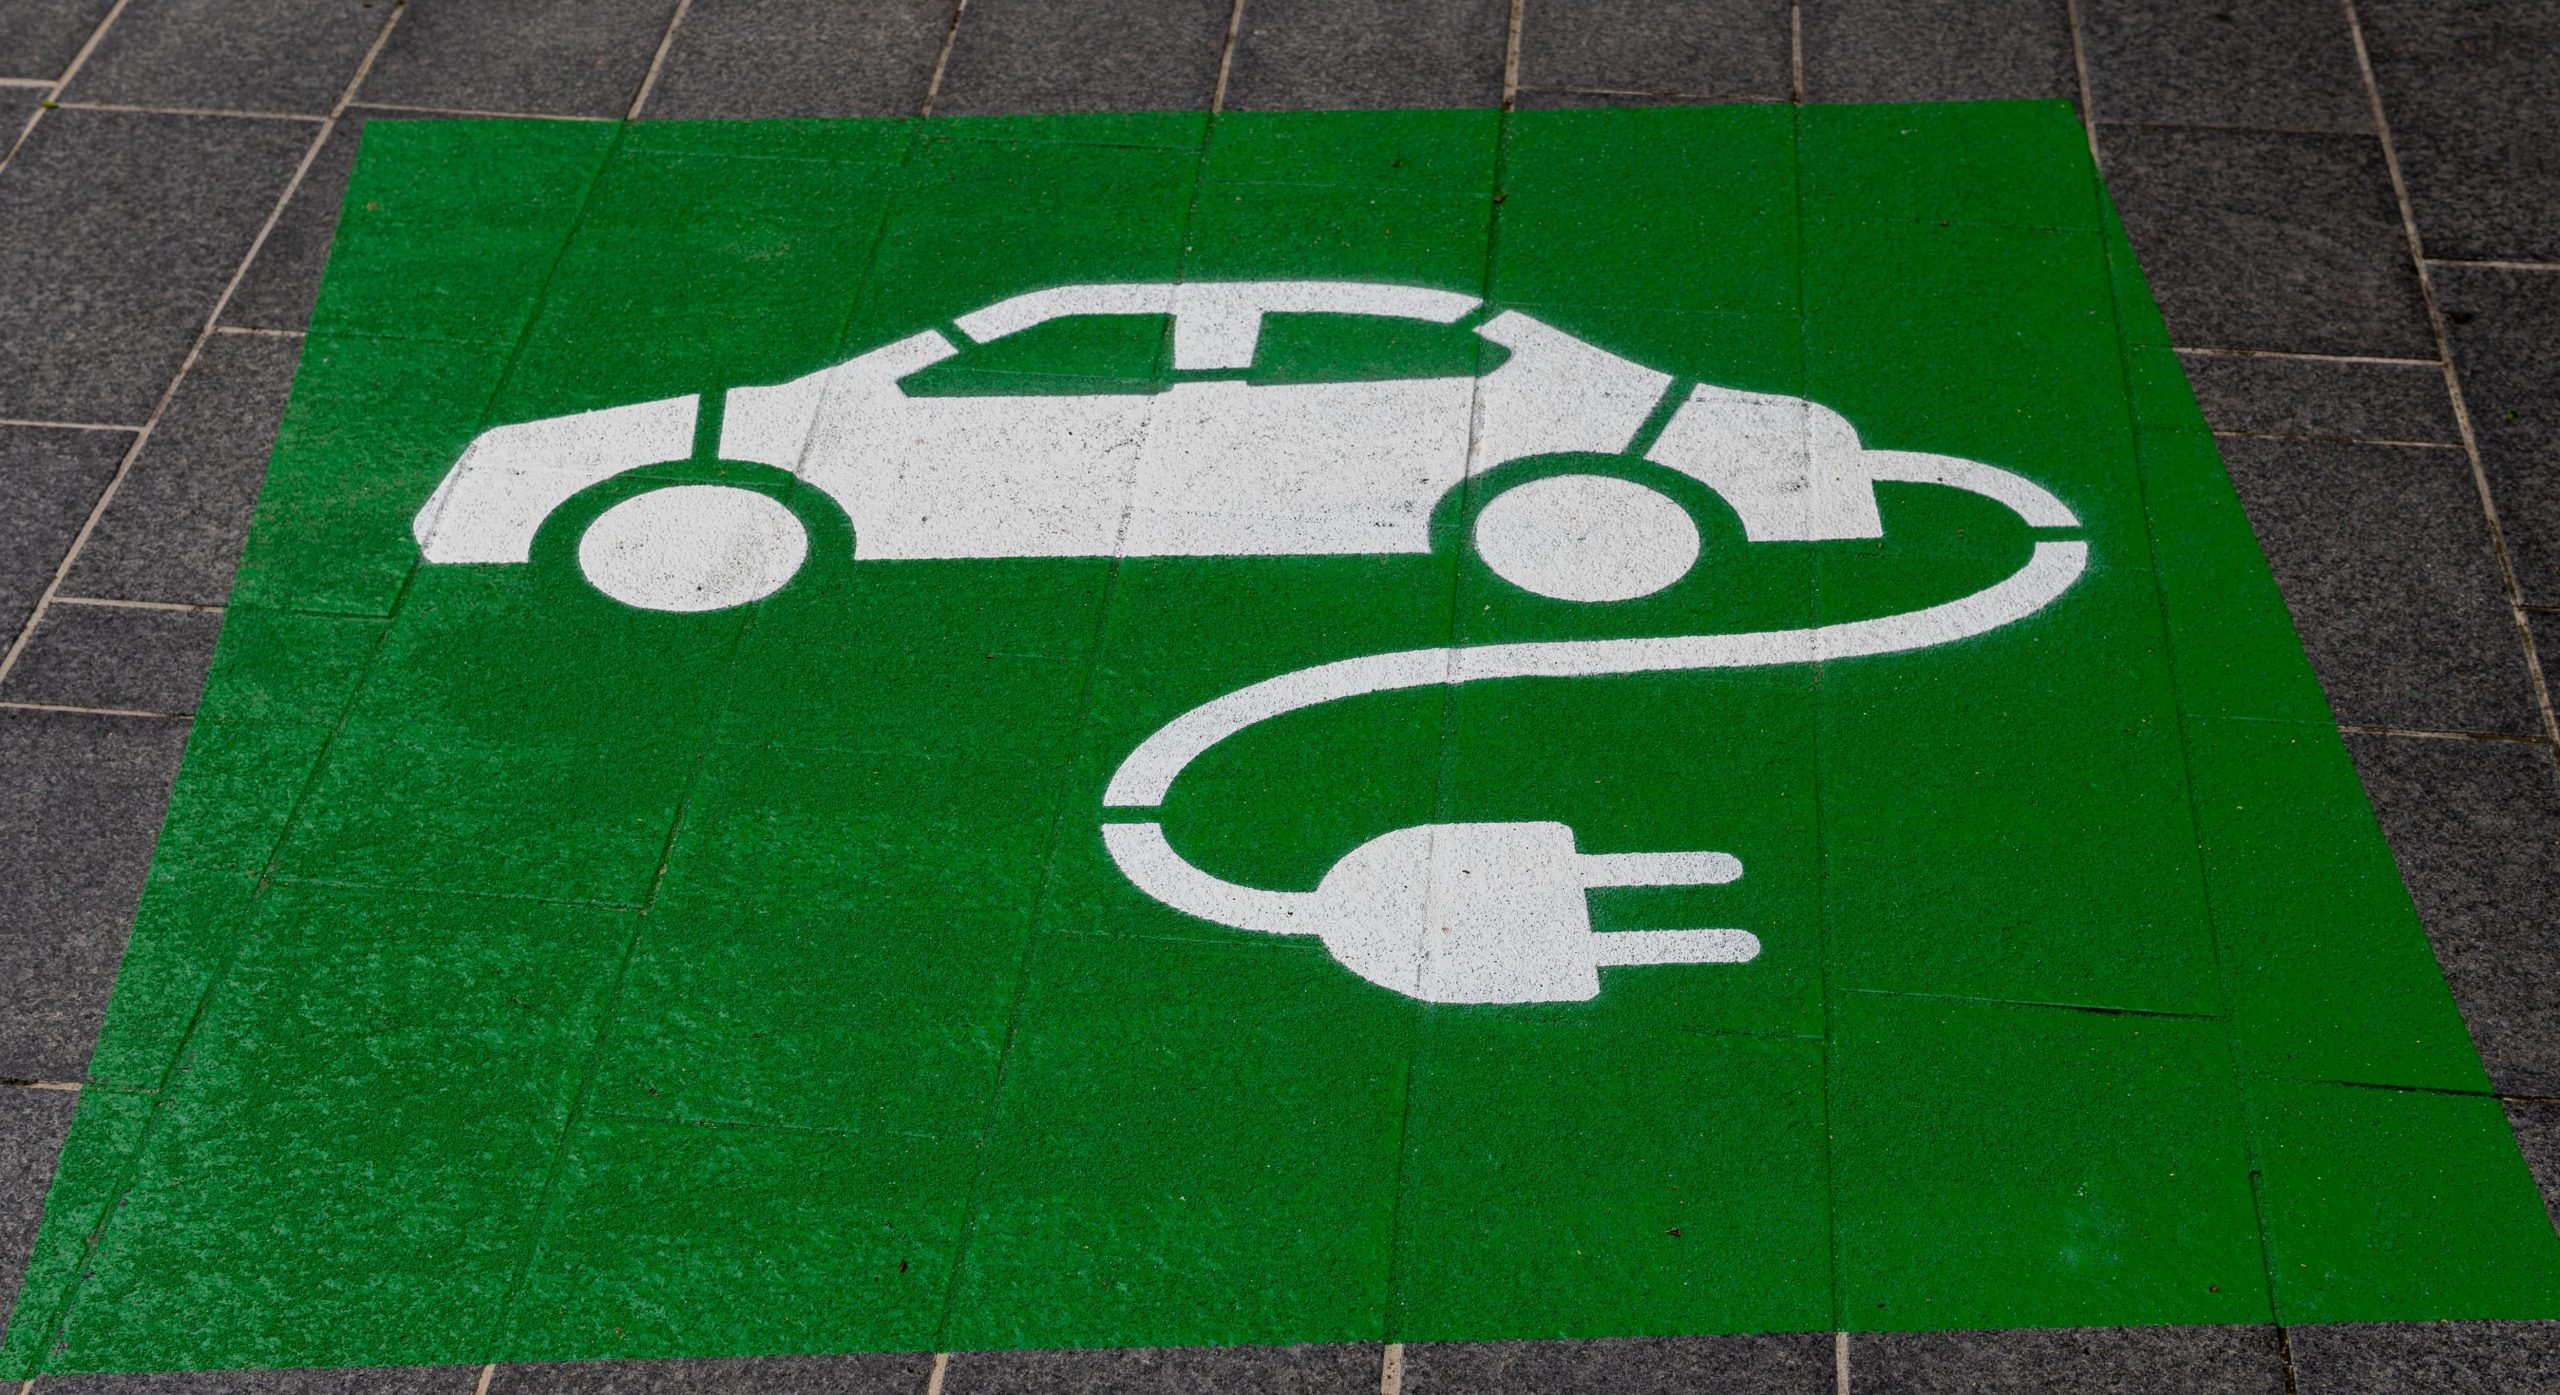 Electric Car Station